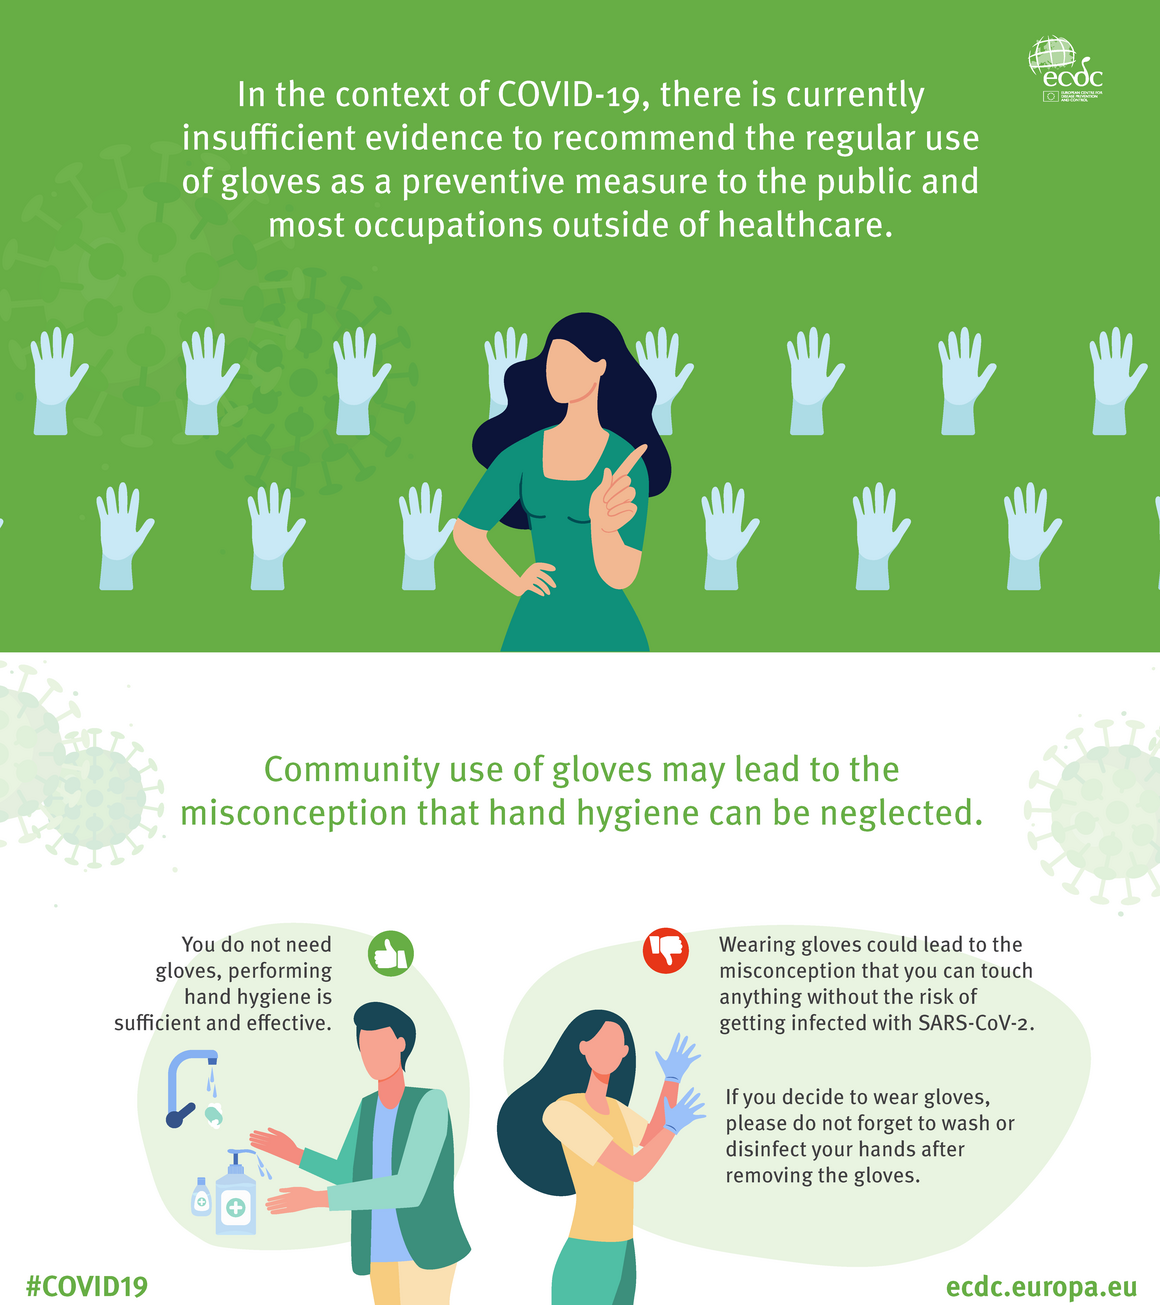 Use-of-gloves-infographic-july-2020.png